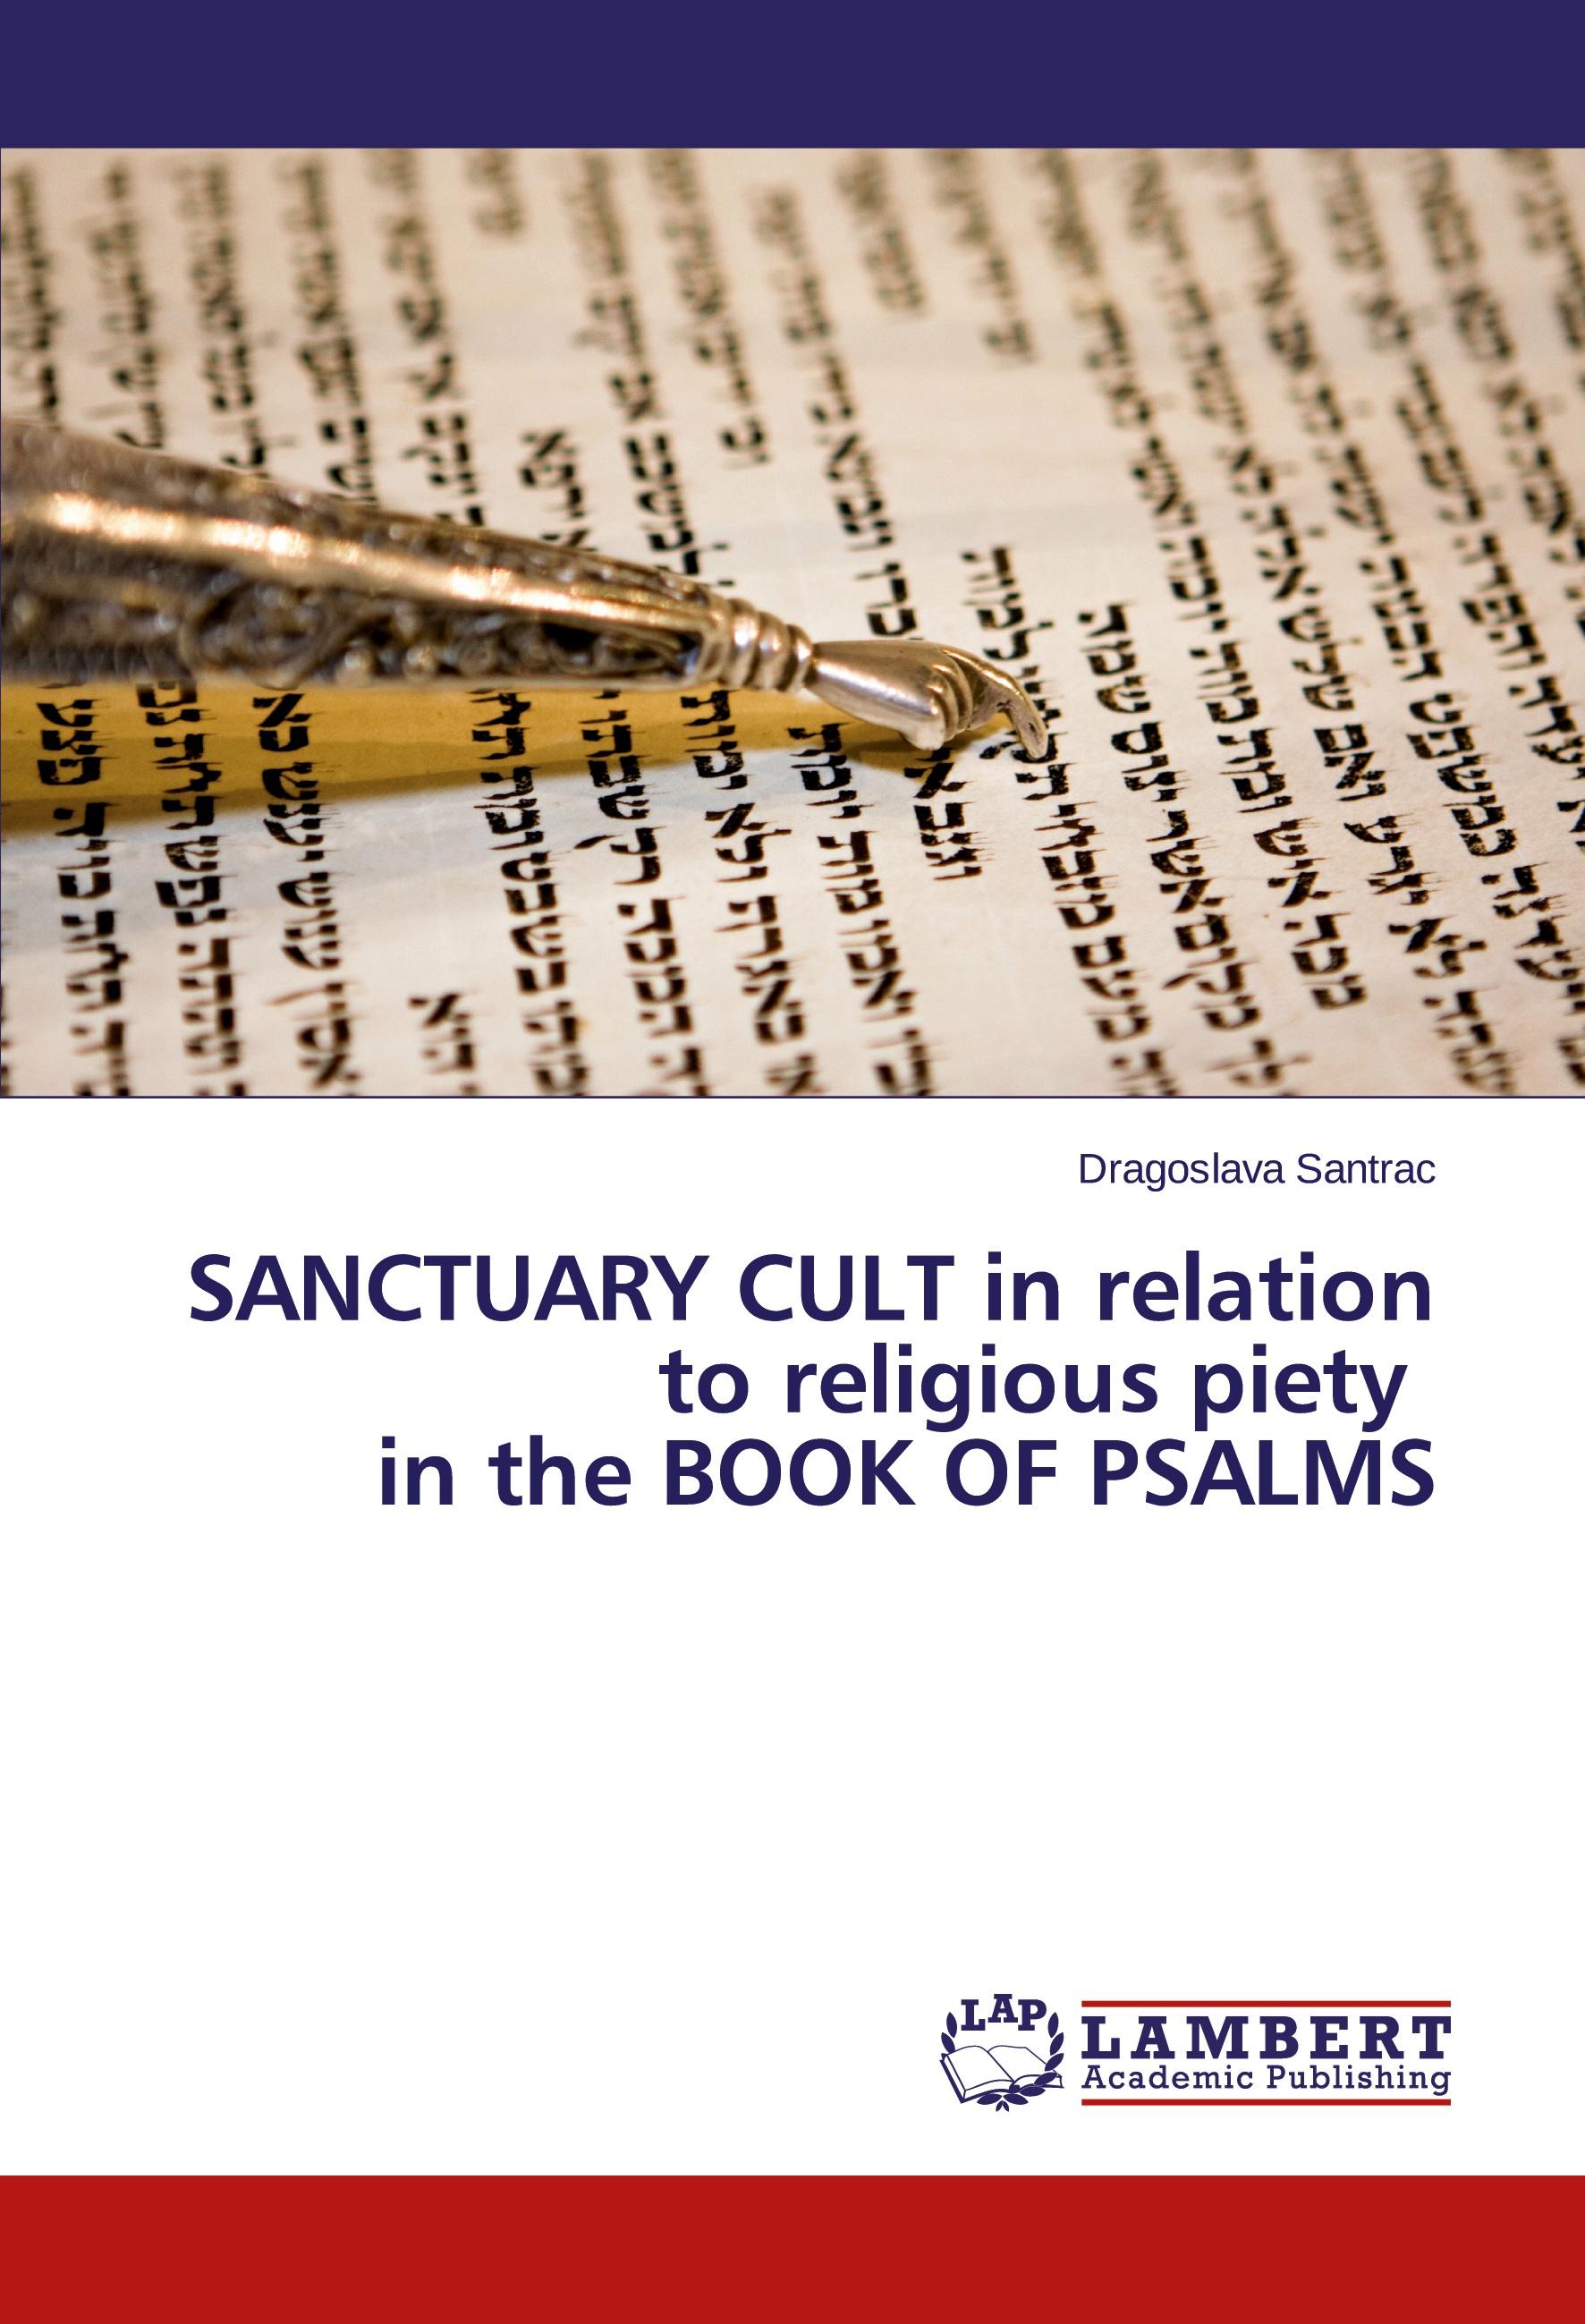 SANCTUARY CULT in relation to religious piety in the BOOK OF PSALMS - Dragoslava Santrac